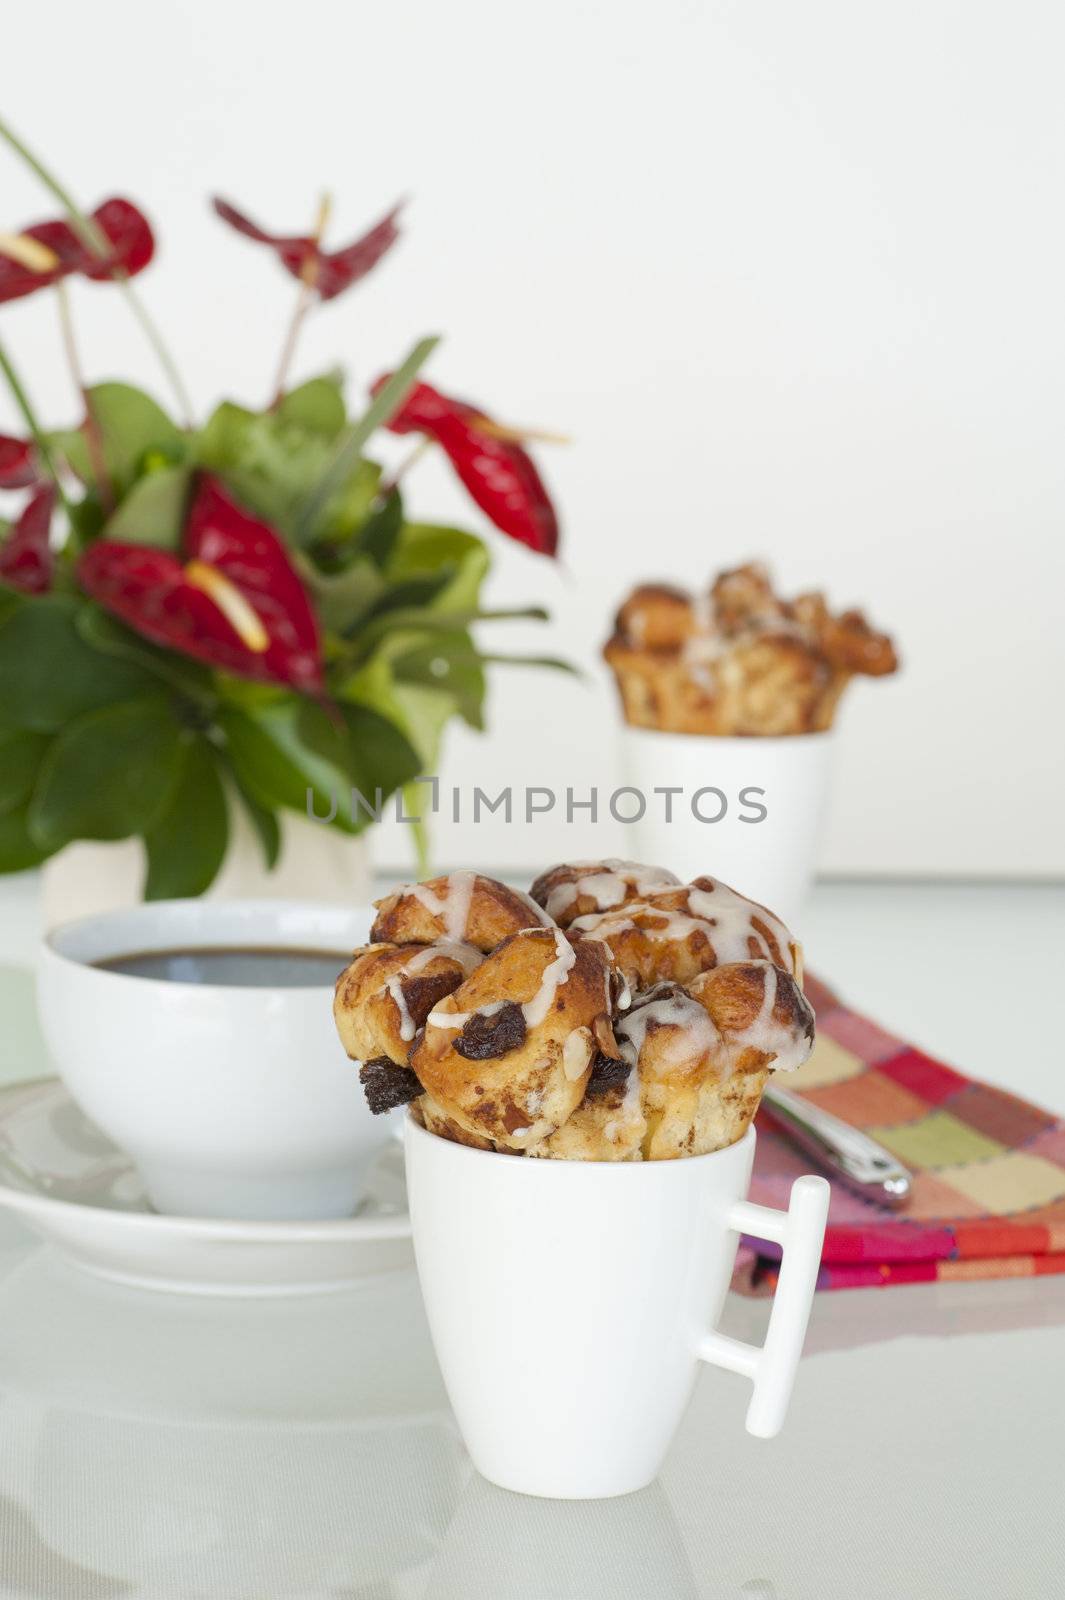 Cinnamon Bun in a Cup by billberryphotography